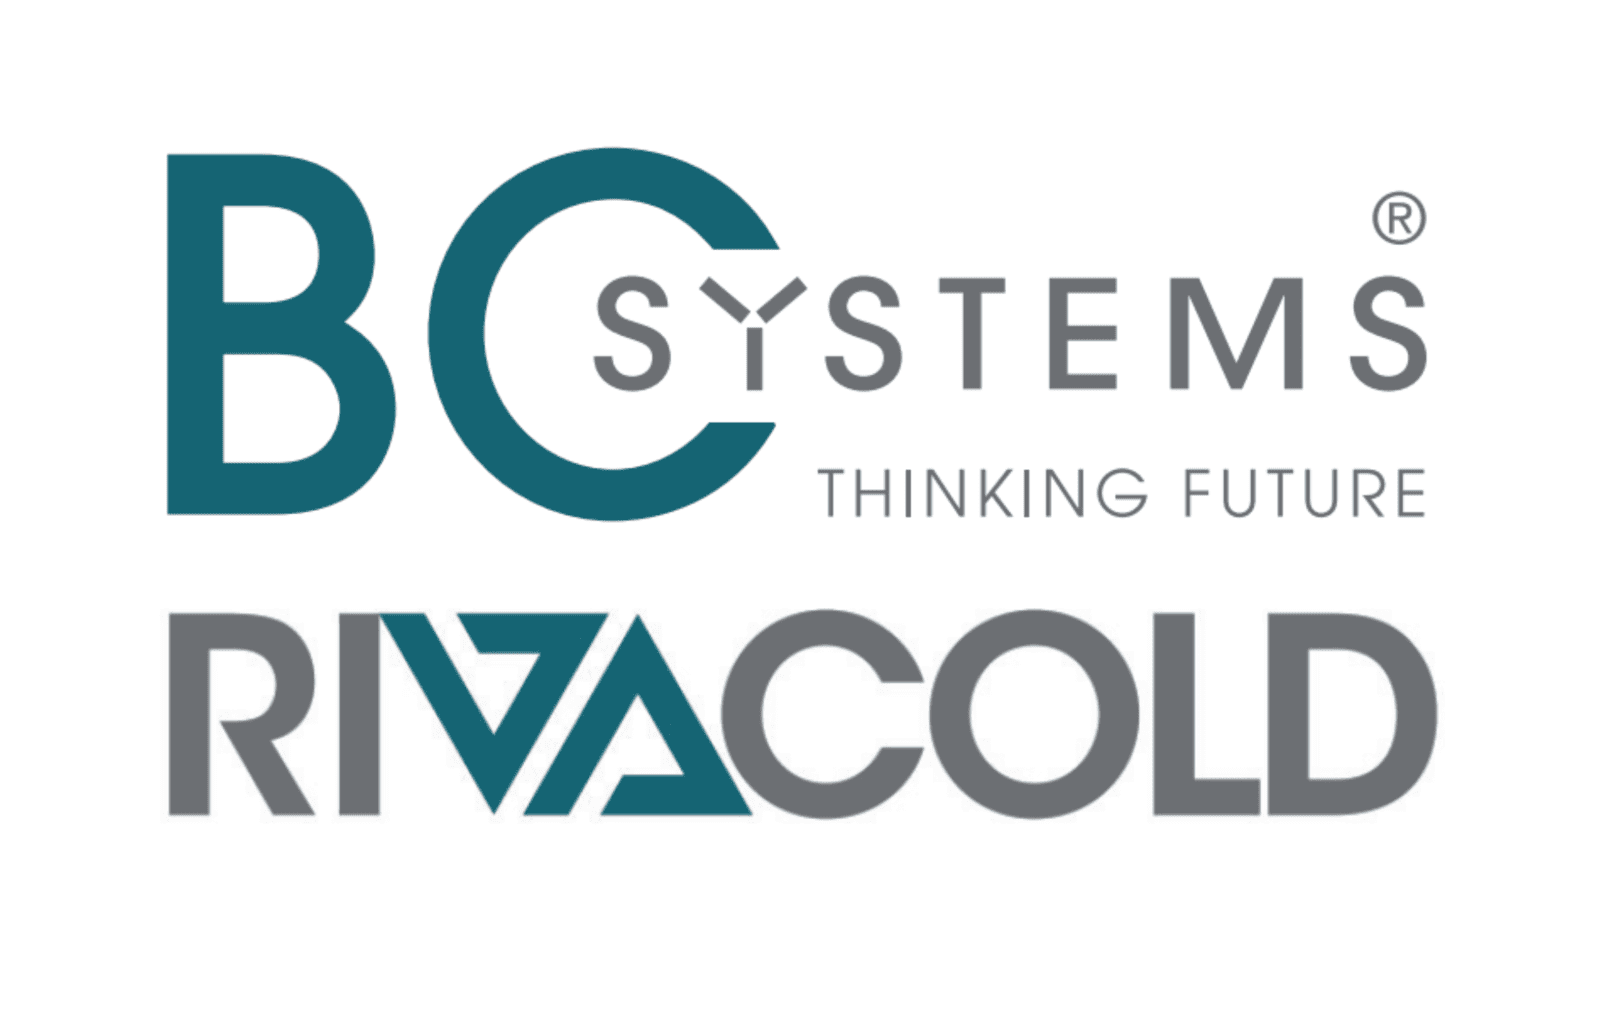 BC Systems Rivacold